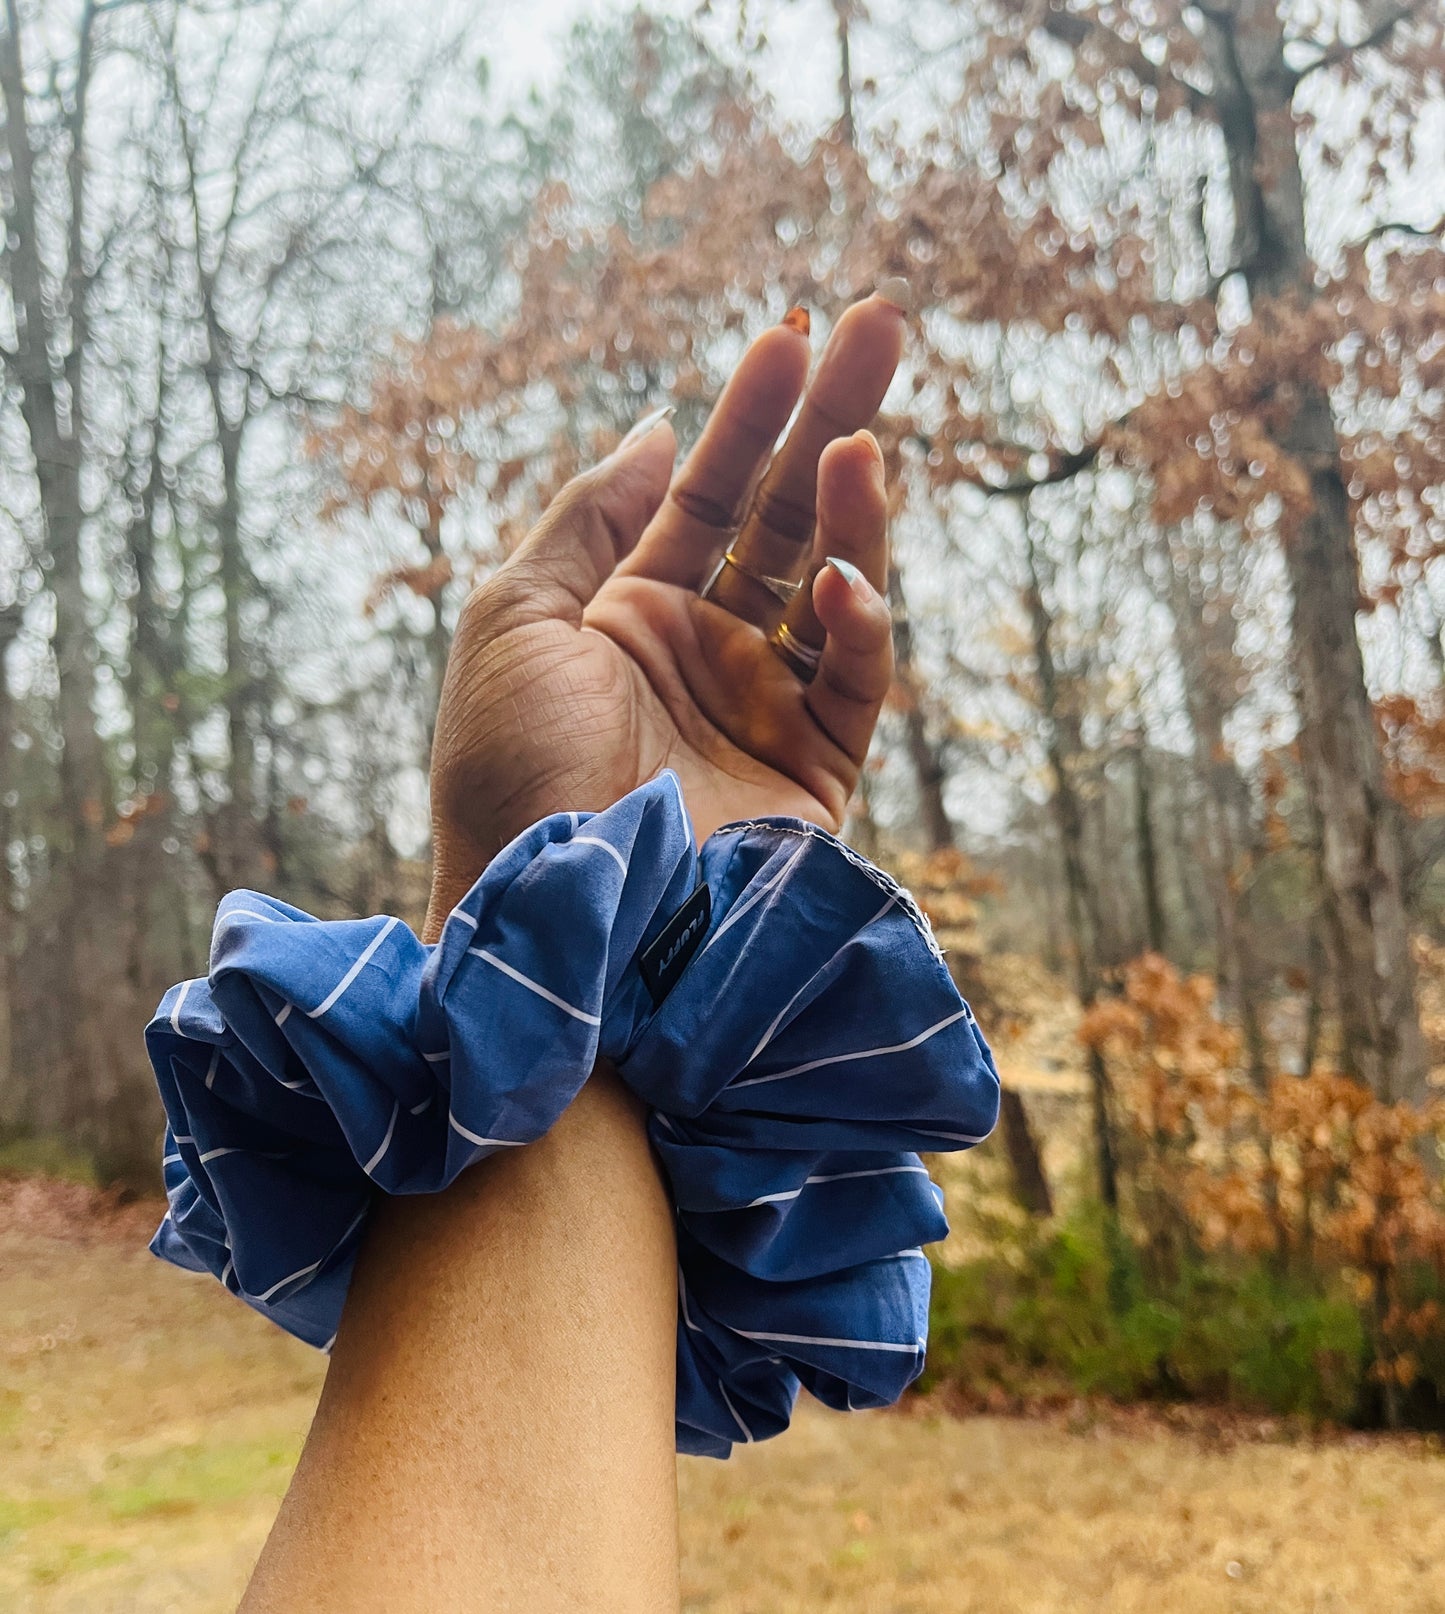 The Ultimate Sleek Pinstripe Fluffy Scrunchie .  The sizes of our cotton scrunchies  are Large, Medium and Mini.  Simply select the size you want in the drop down menu and add them to the card.   Our cotton scrunchies are perfect for all hair types and every person. We have multiple colors and sizes available